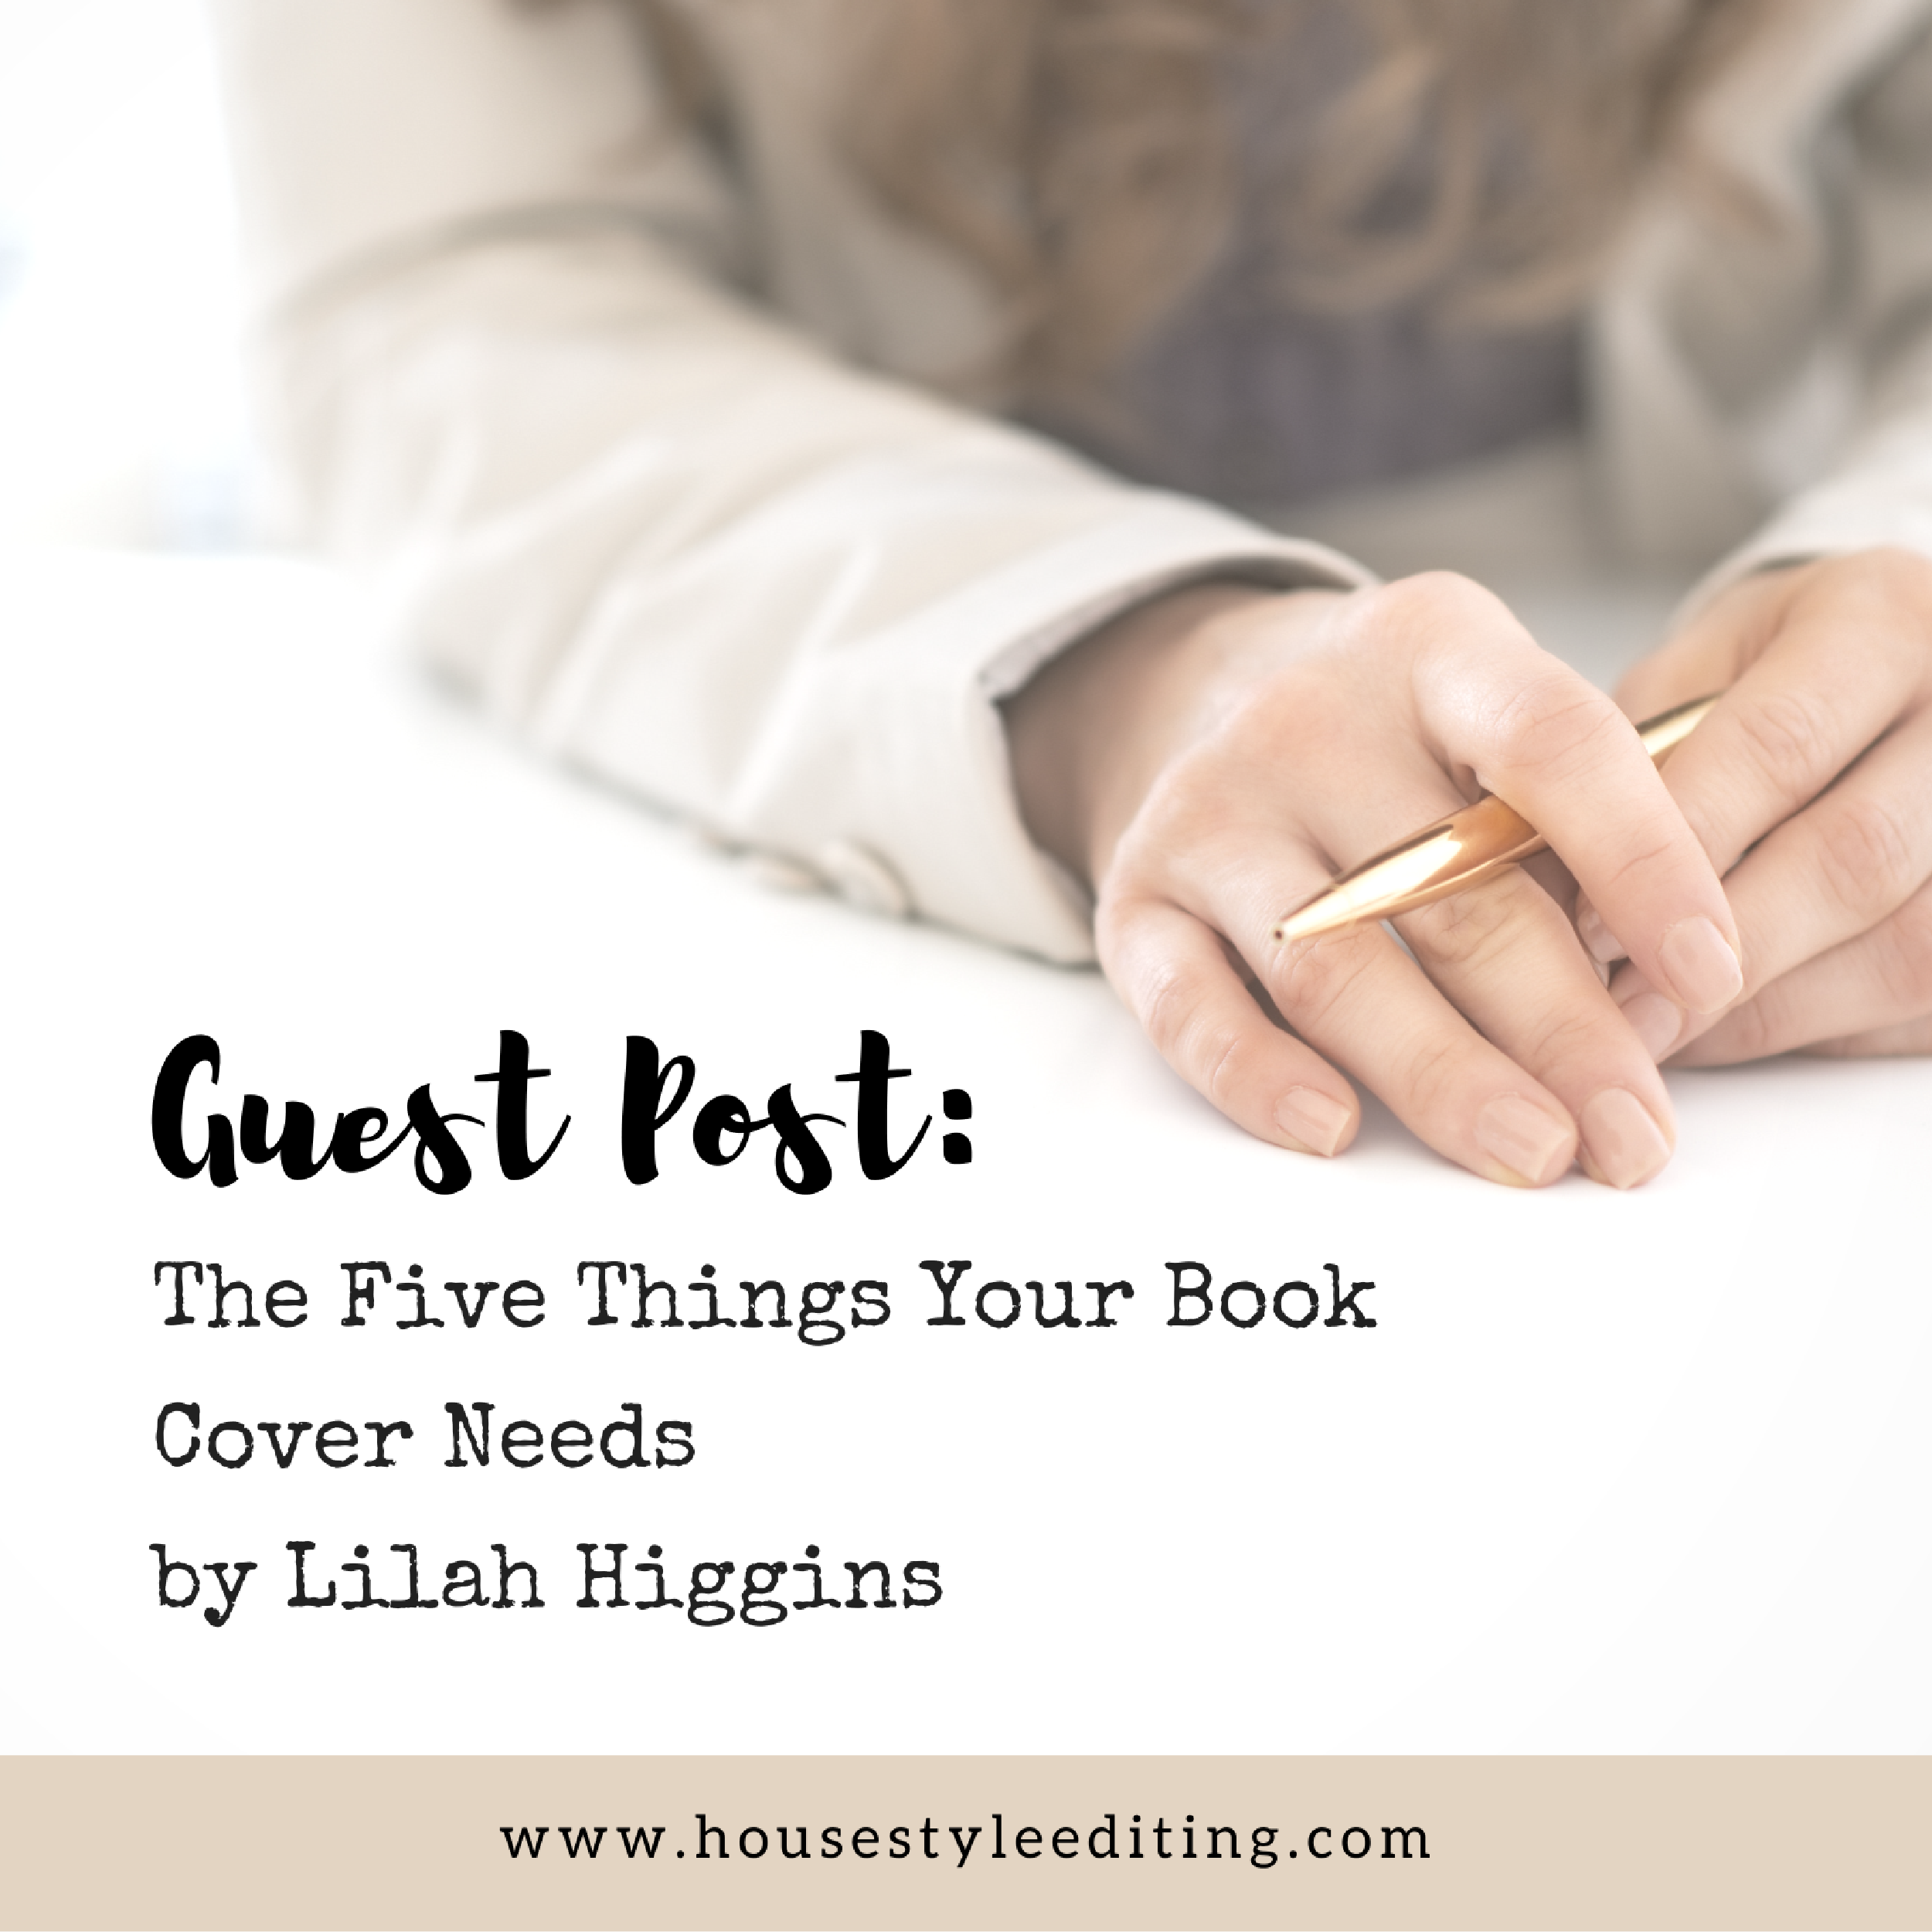 The 5 Things Your Book Cover Needs by Lilah Higgins